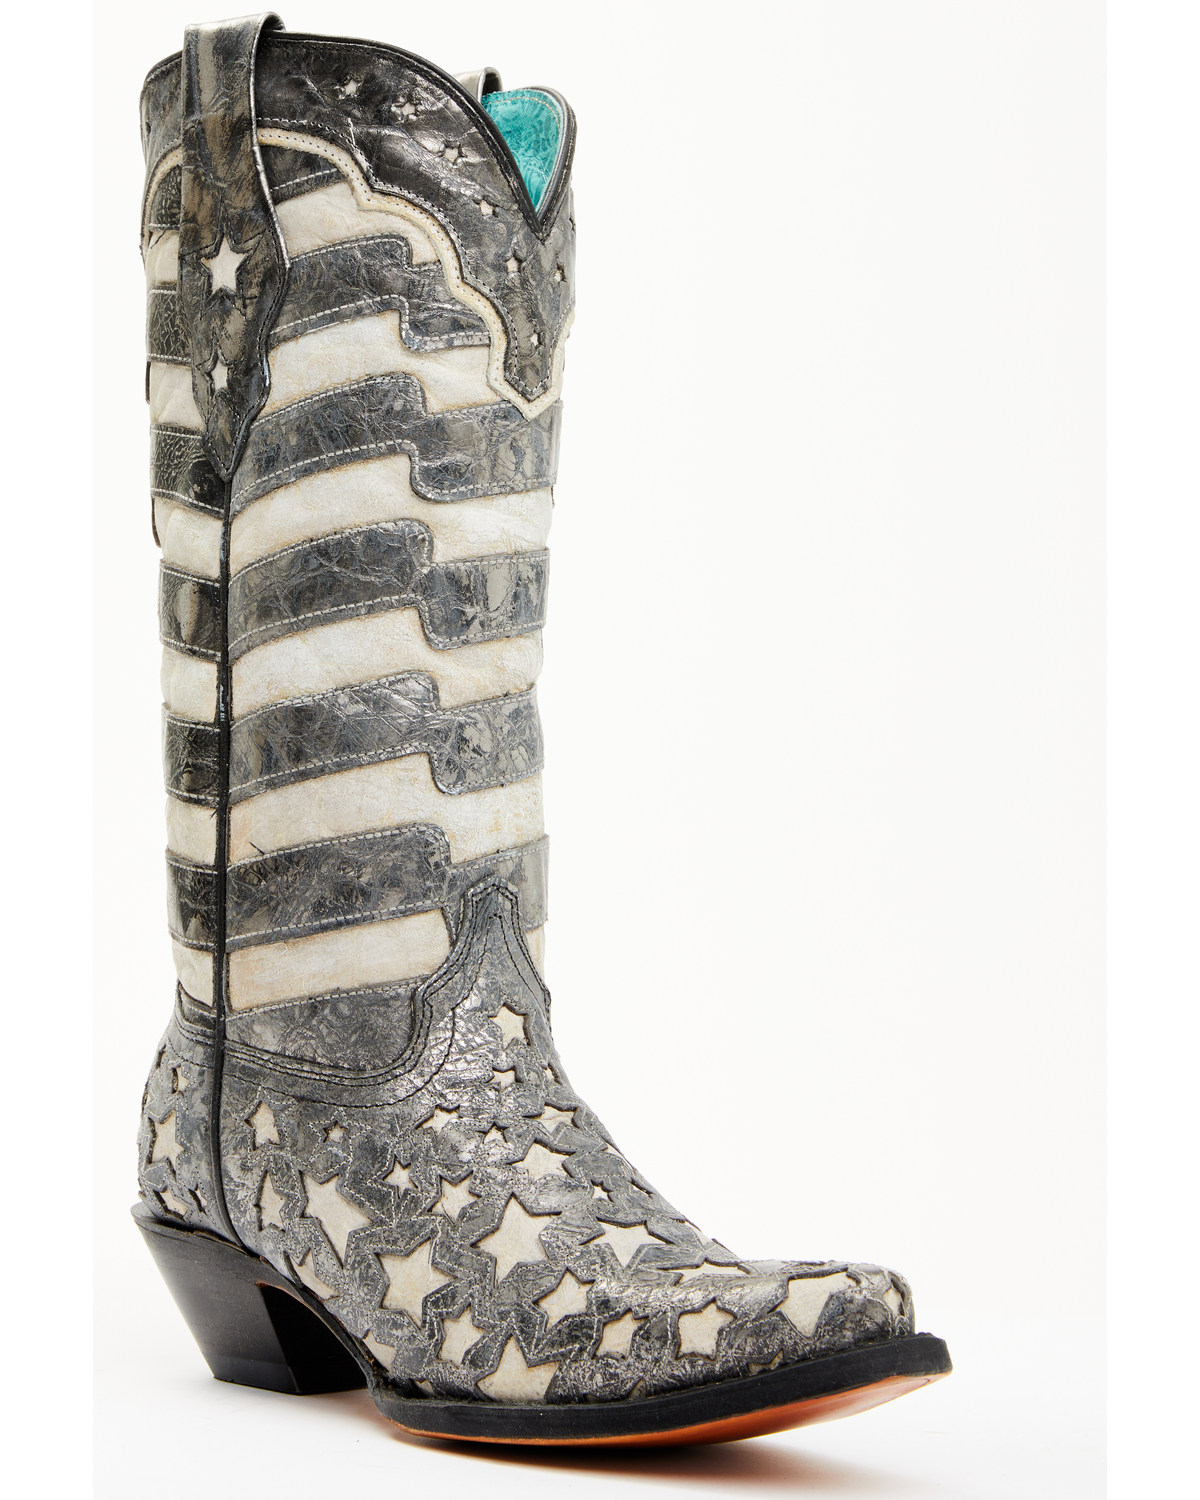 Corral Women's Stars and Stripes Blacklight Western Boots - Snip Toe